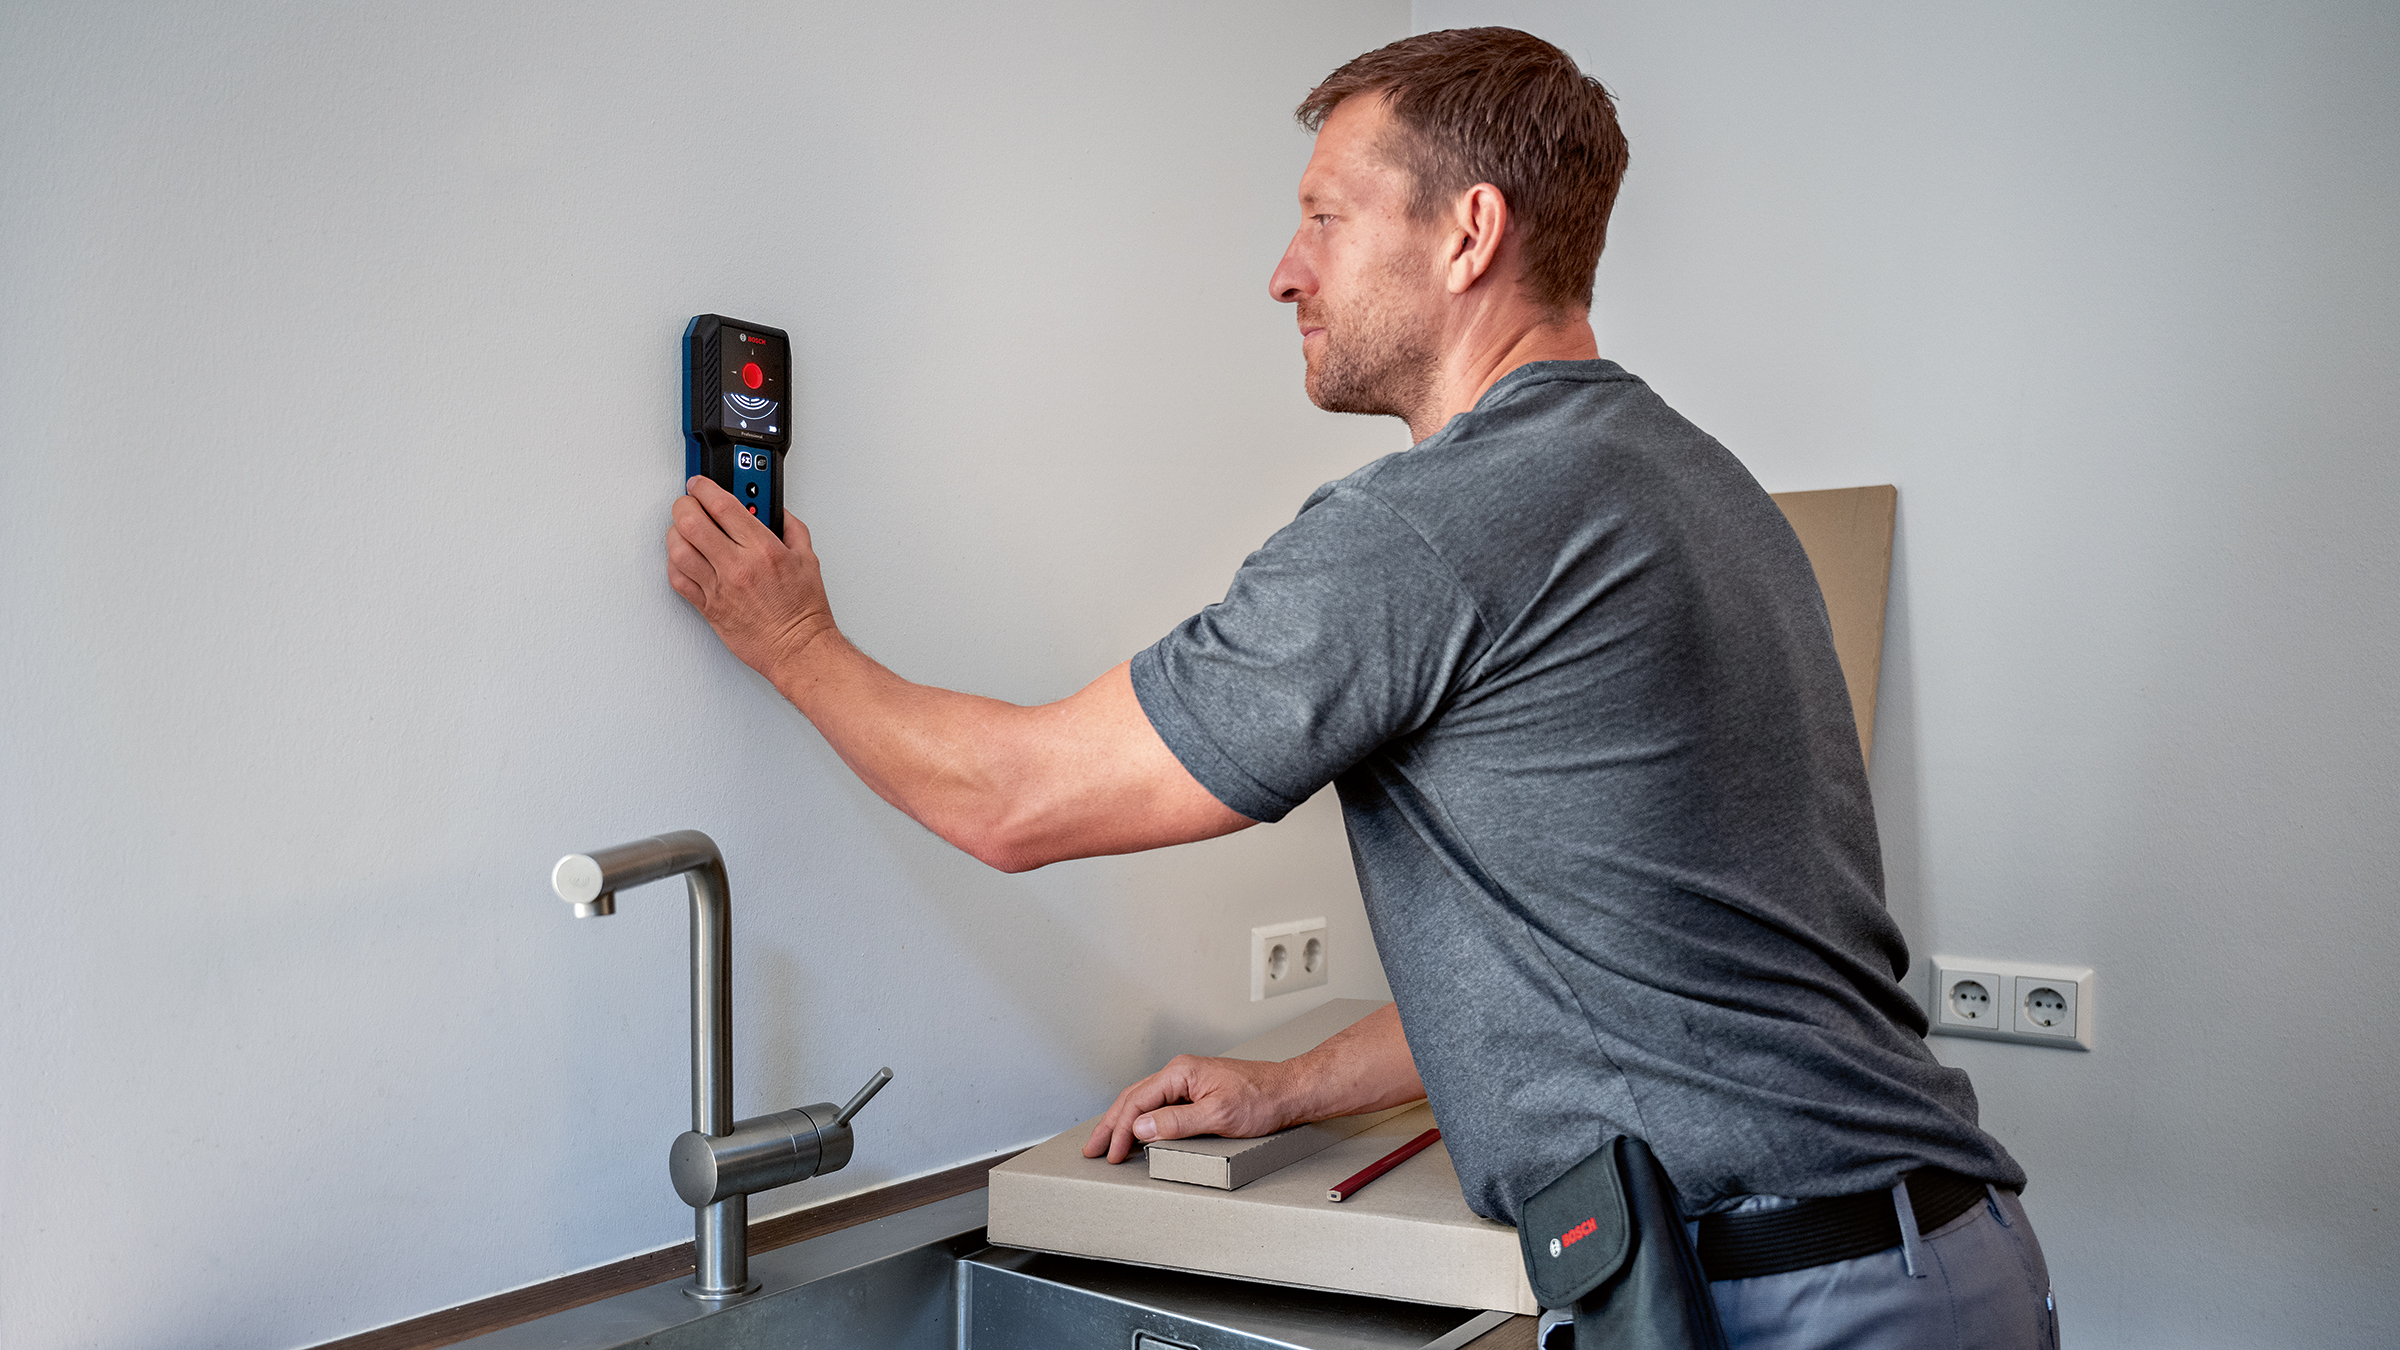 More safety when drilling thanks to precise results: Bosch GMS 120-27 Professional multi scanner for pros